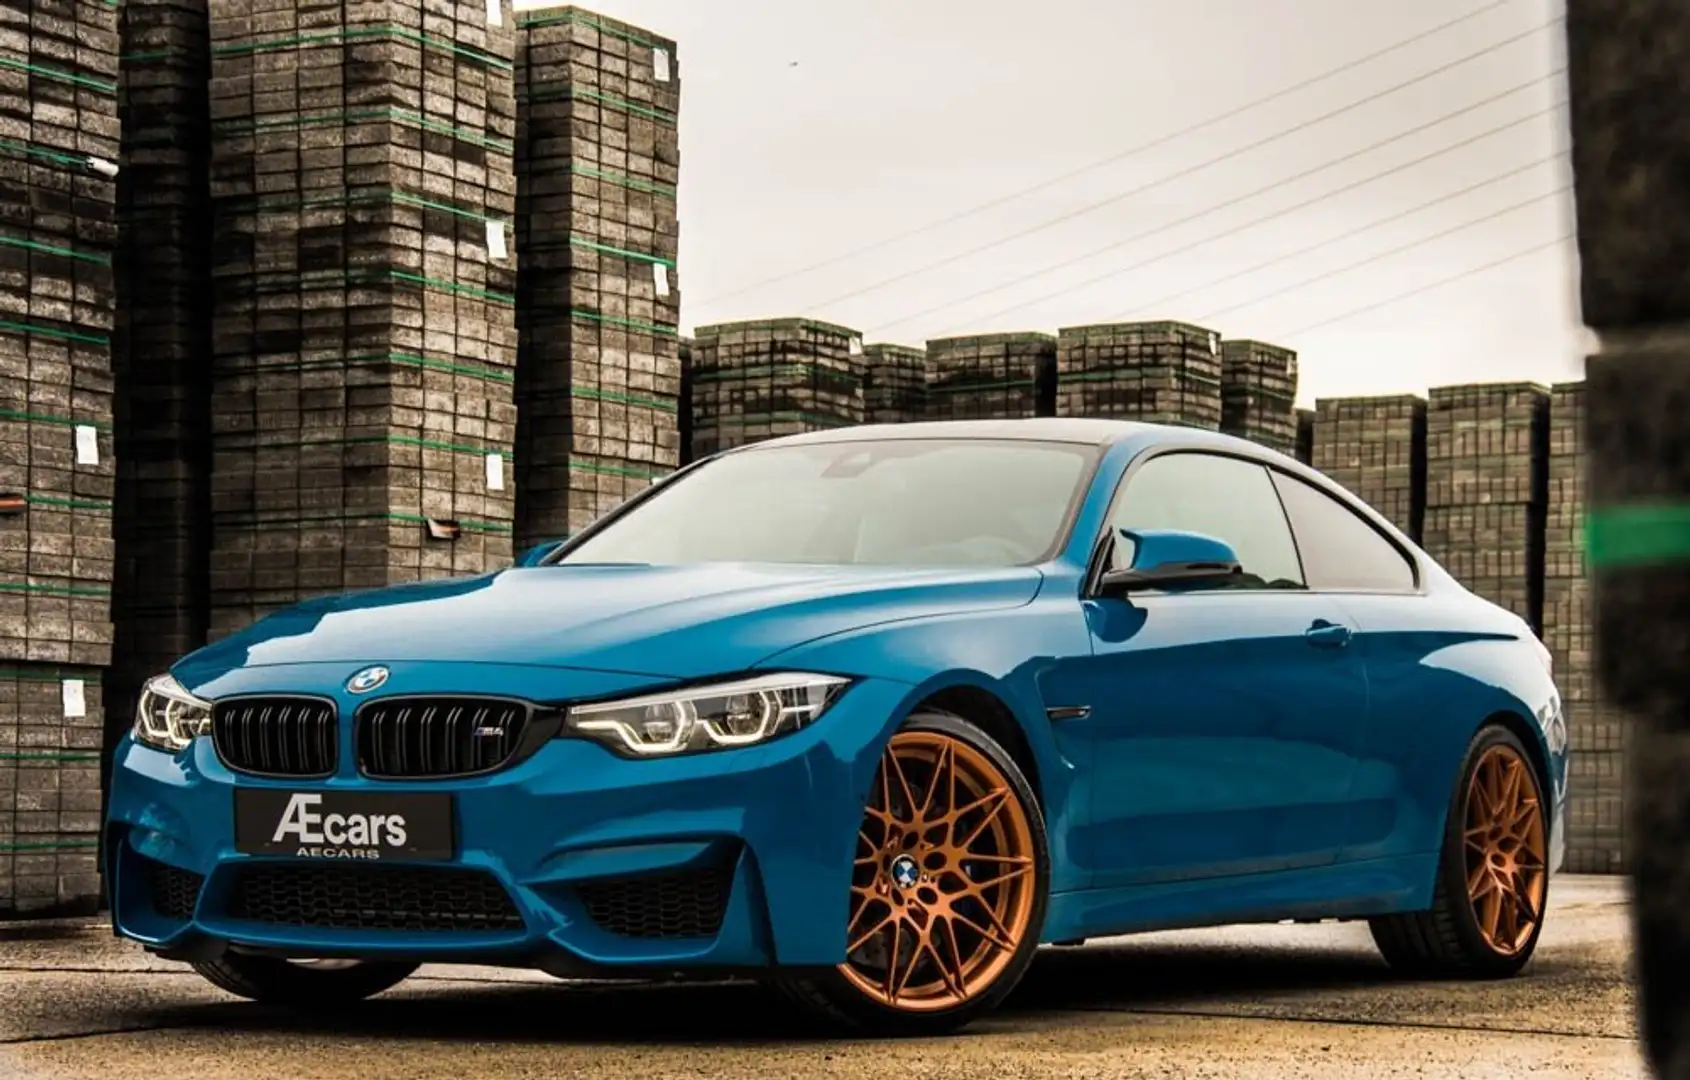 BMW M4 *** COMPETITION HERITAGE / LIMITED 1 OF 750 *** Синій - 1